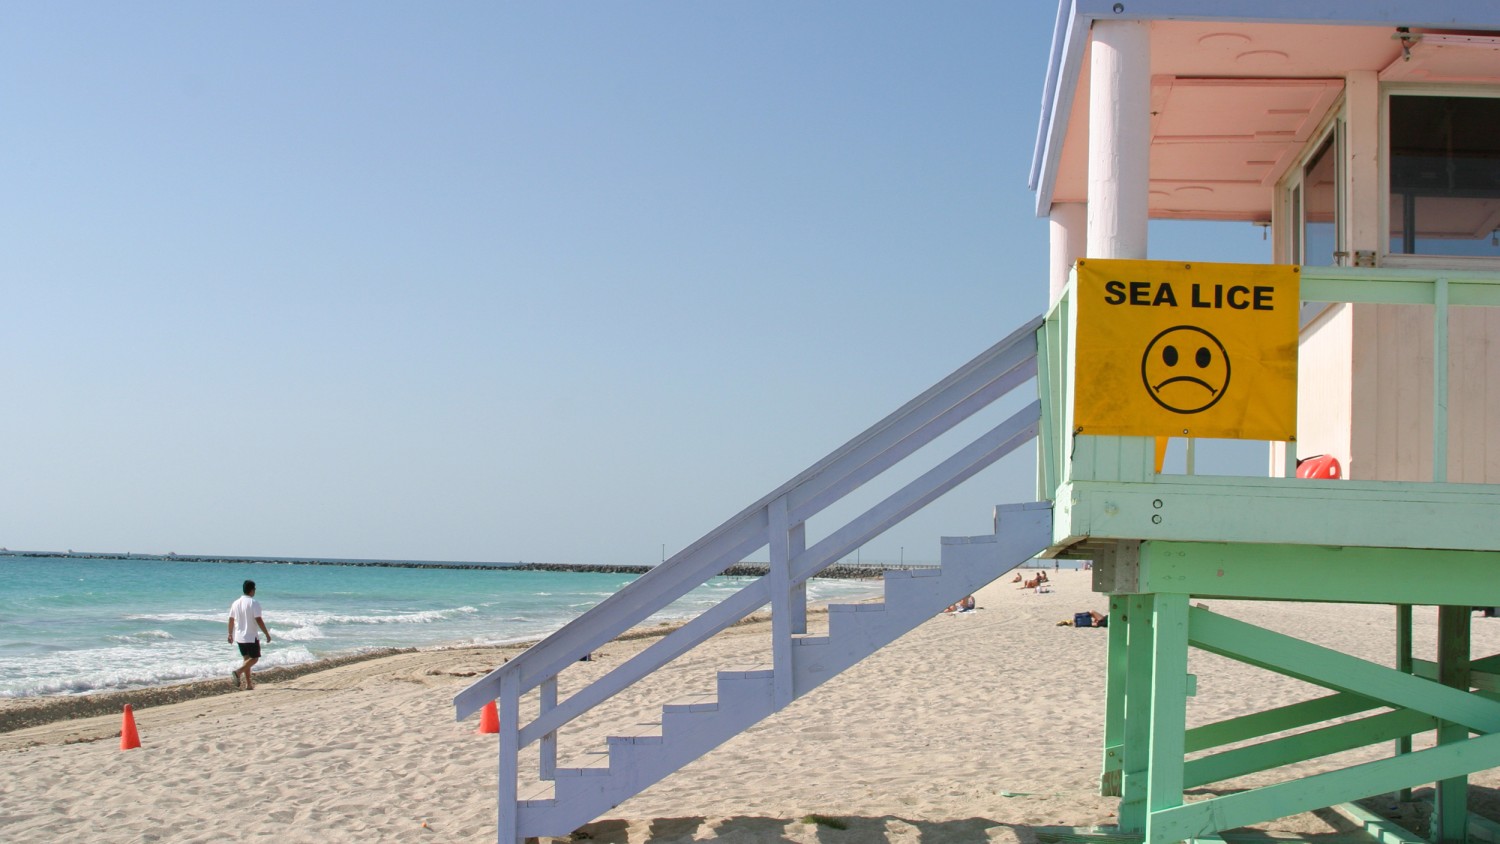 How to avoid sharks, jellyfish and sea lice at the beach